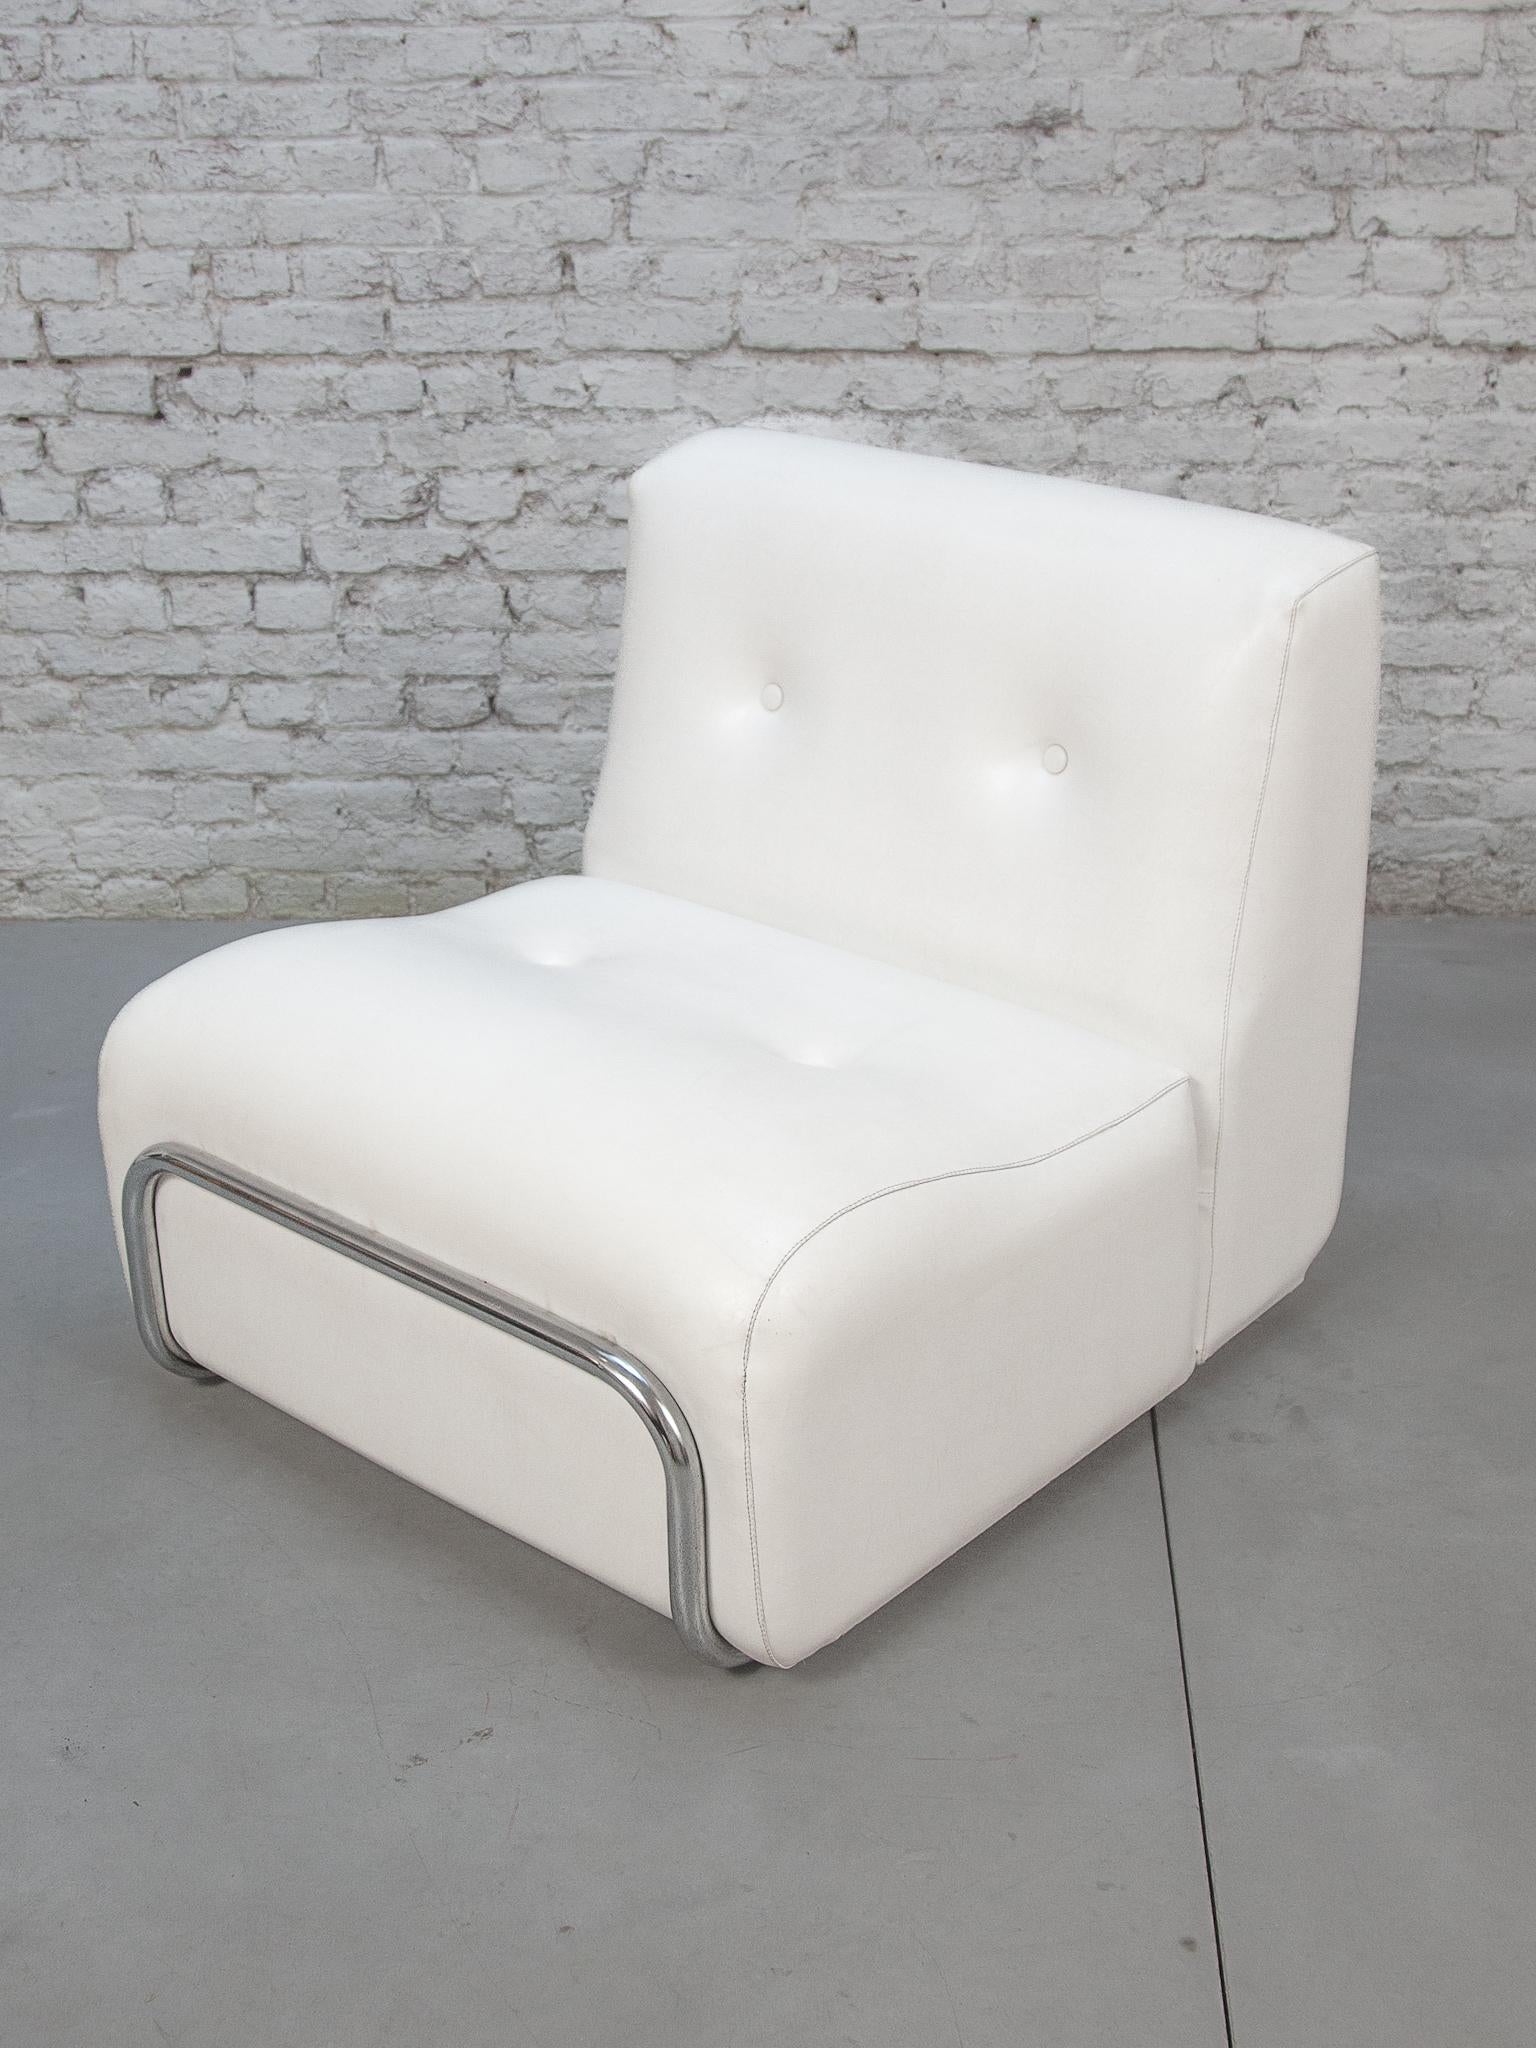 White and Chrome Livingroom set of Adriano Piazzesi Lounge Chairs and Footstools For Sale 1